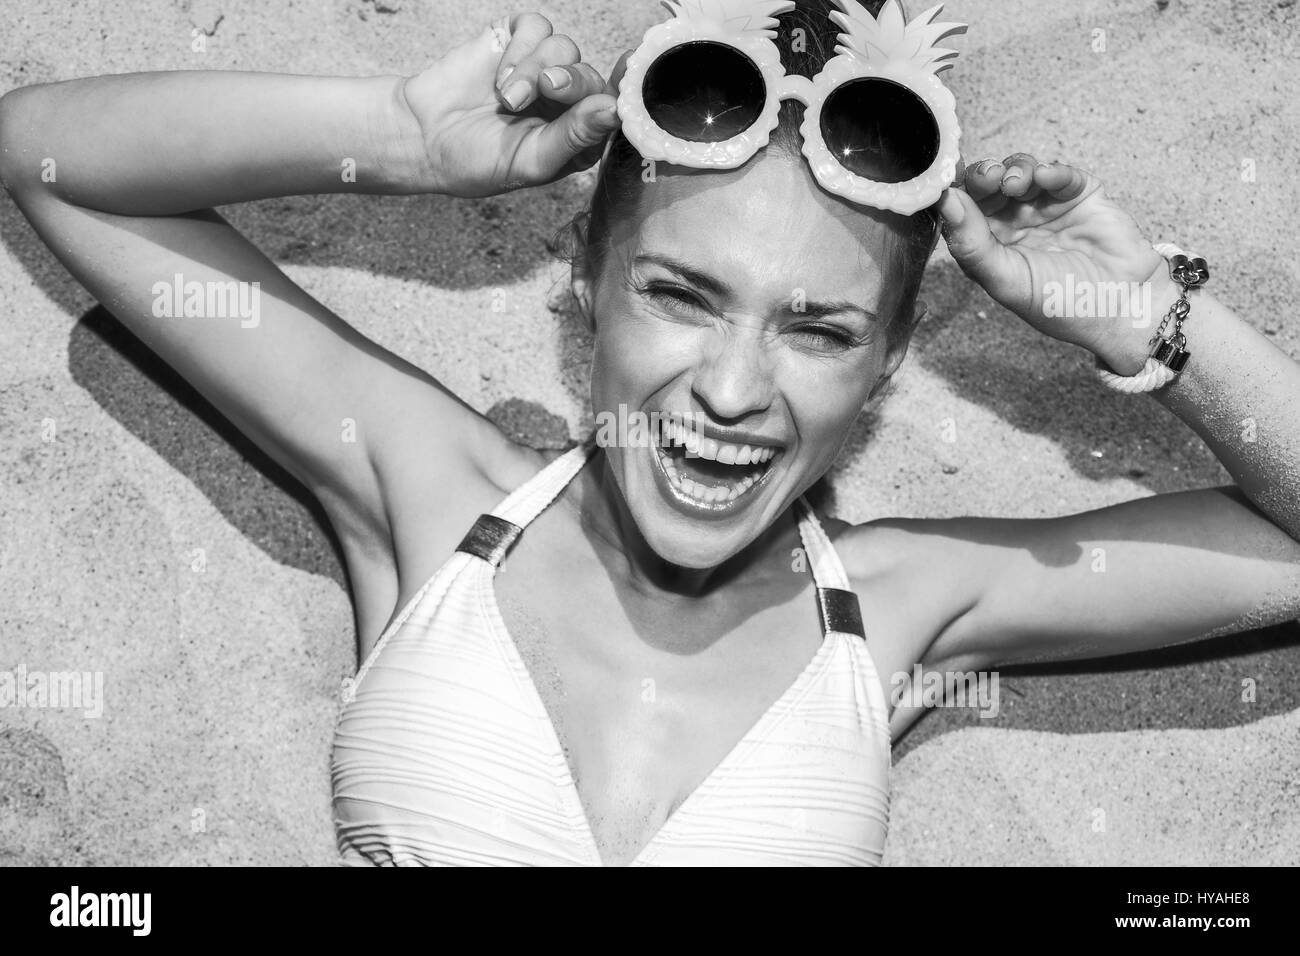 Warm sand treatment. Portrait of cheerful woman in swimsuit with funny pineapple glasses laying on the sand Stock Photo